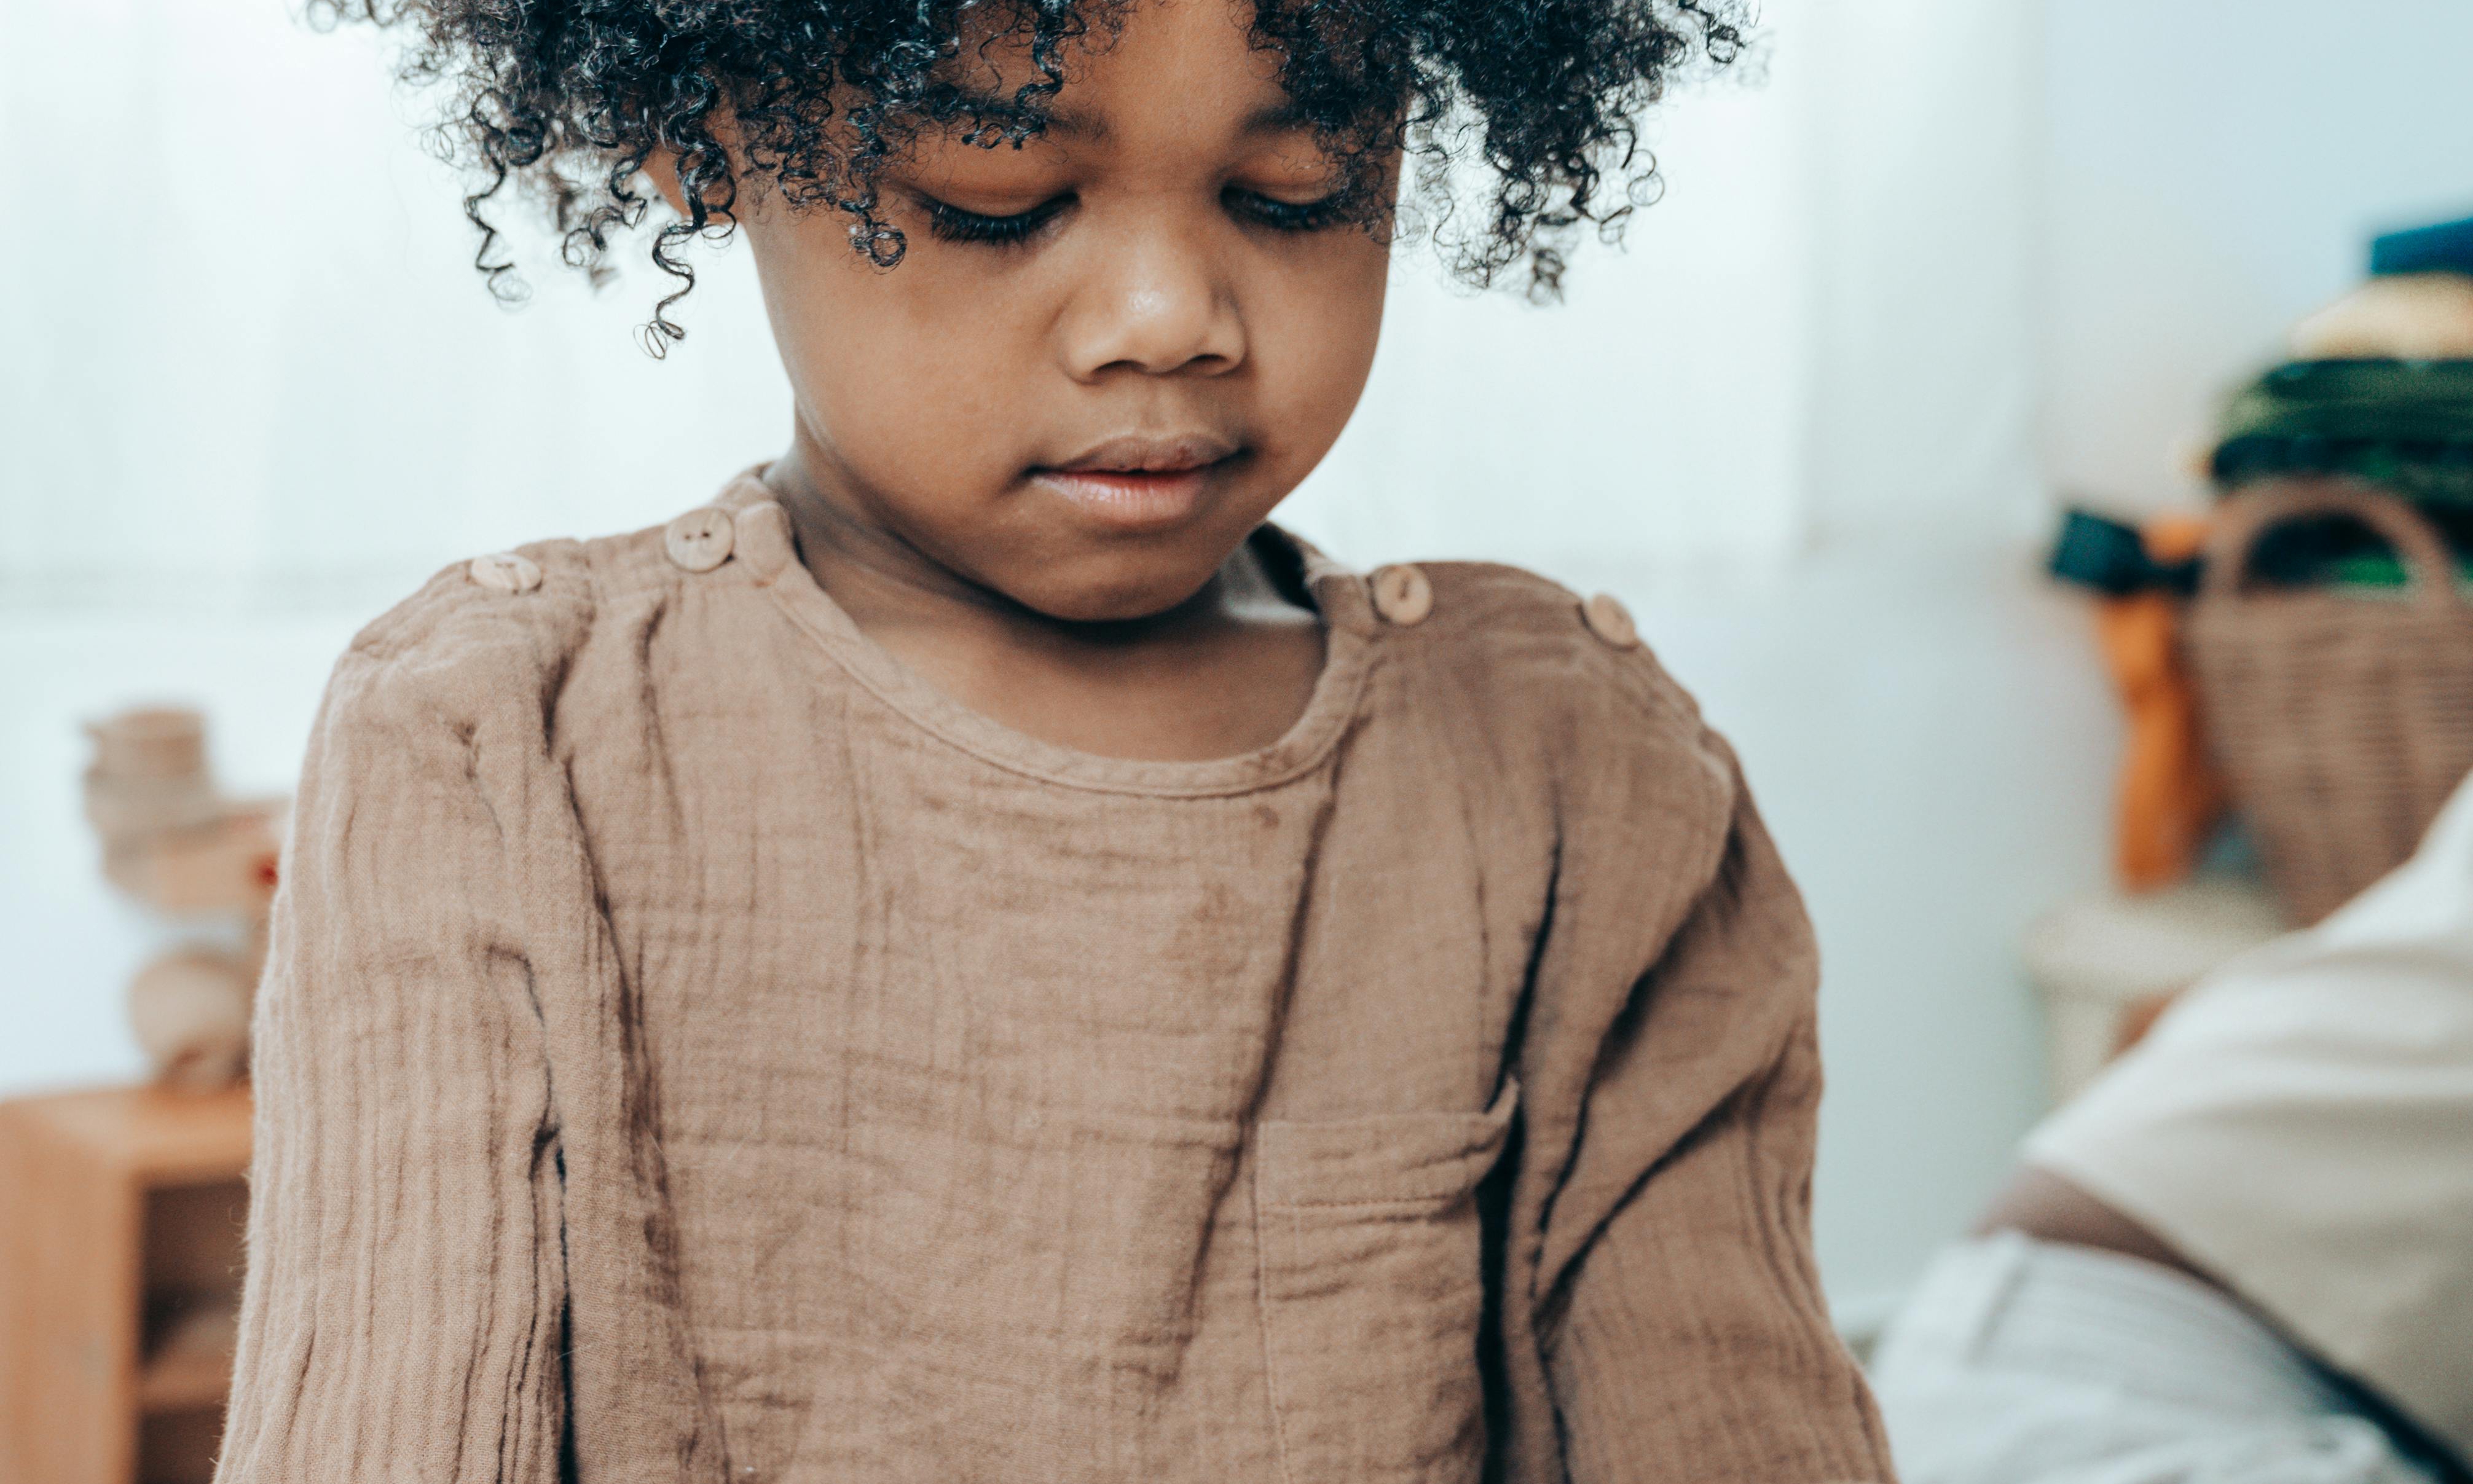 A child wearing an old dress | Source: Pexels